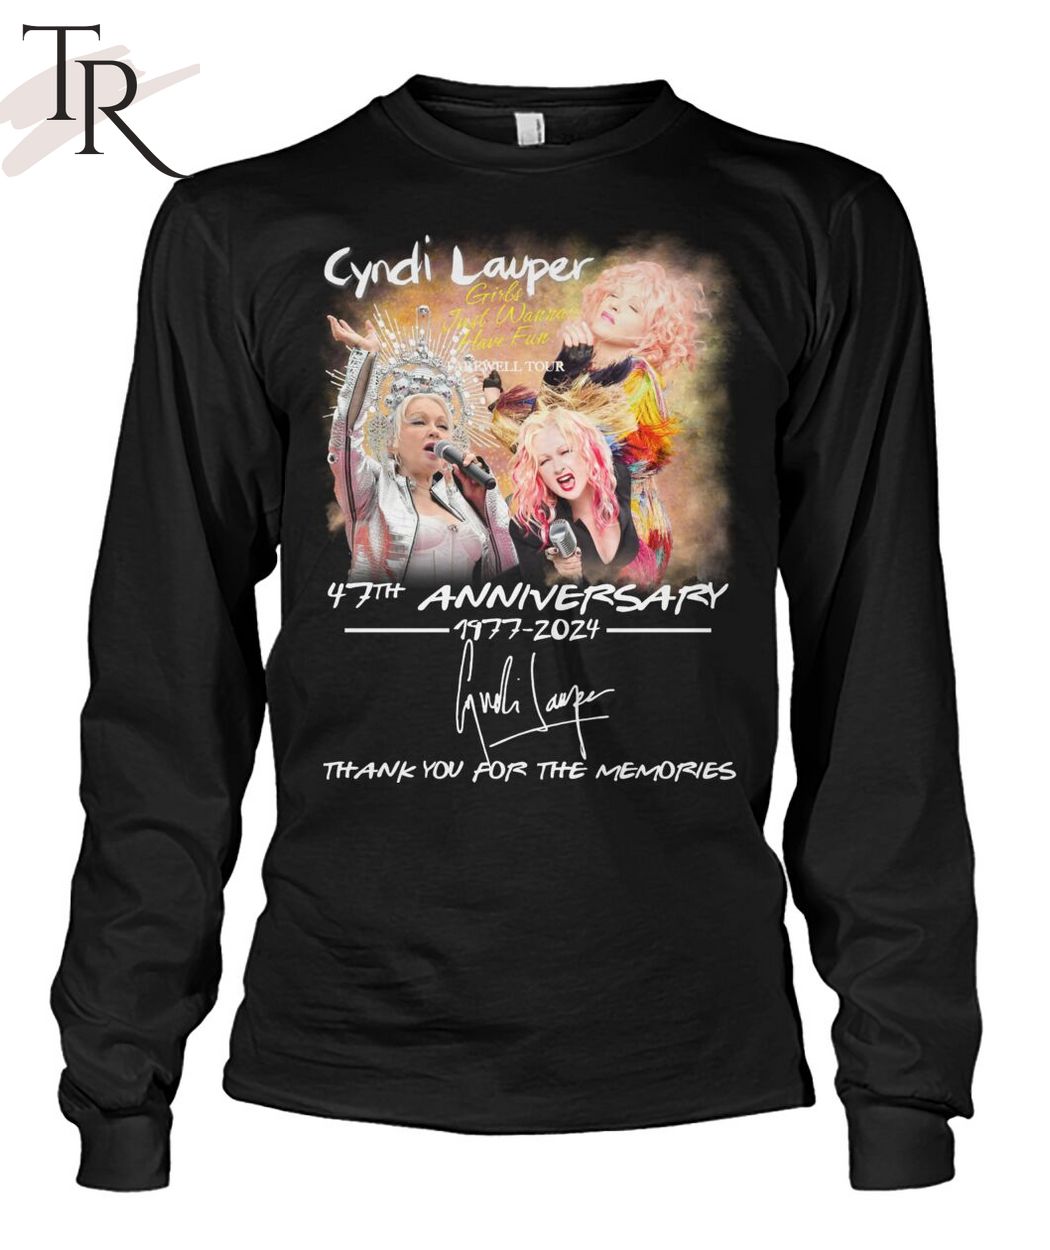 Cyndi Lauper Girls Just Want to Have Fun Farewell Tour 47th Anniversary 1977-2024 Thank You For The Memories T-Shirt